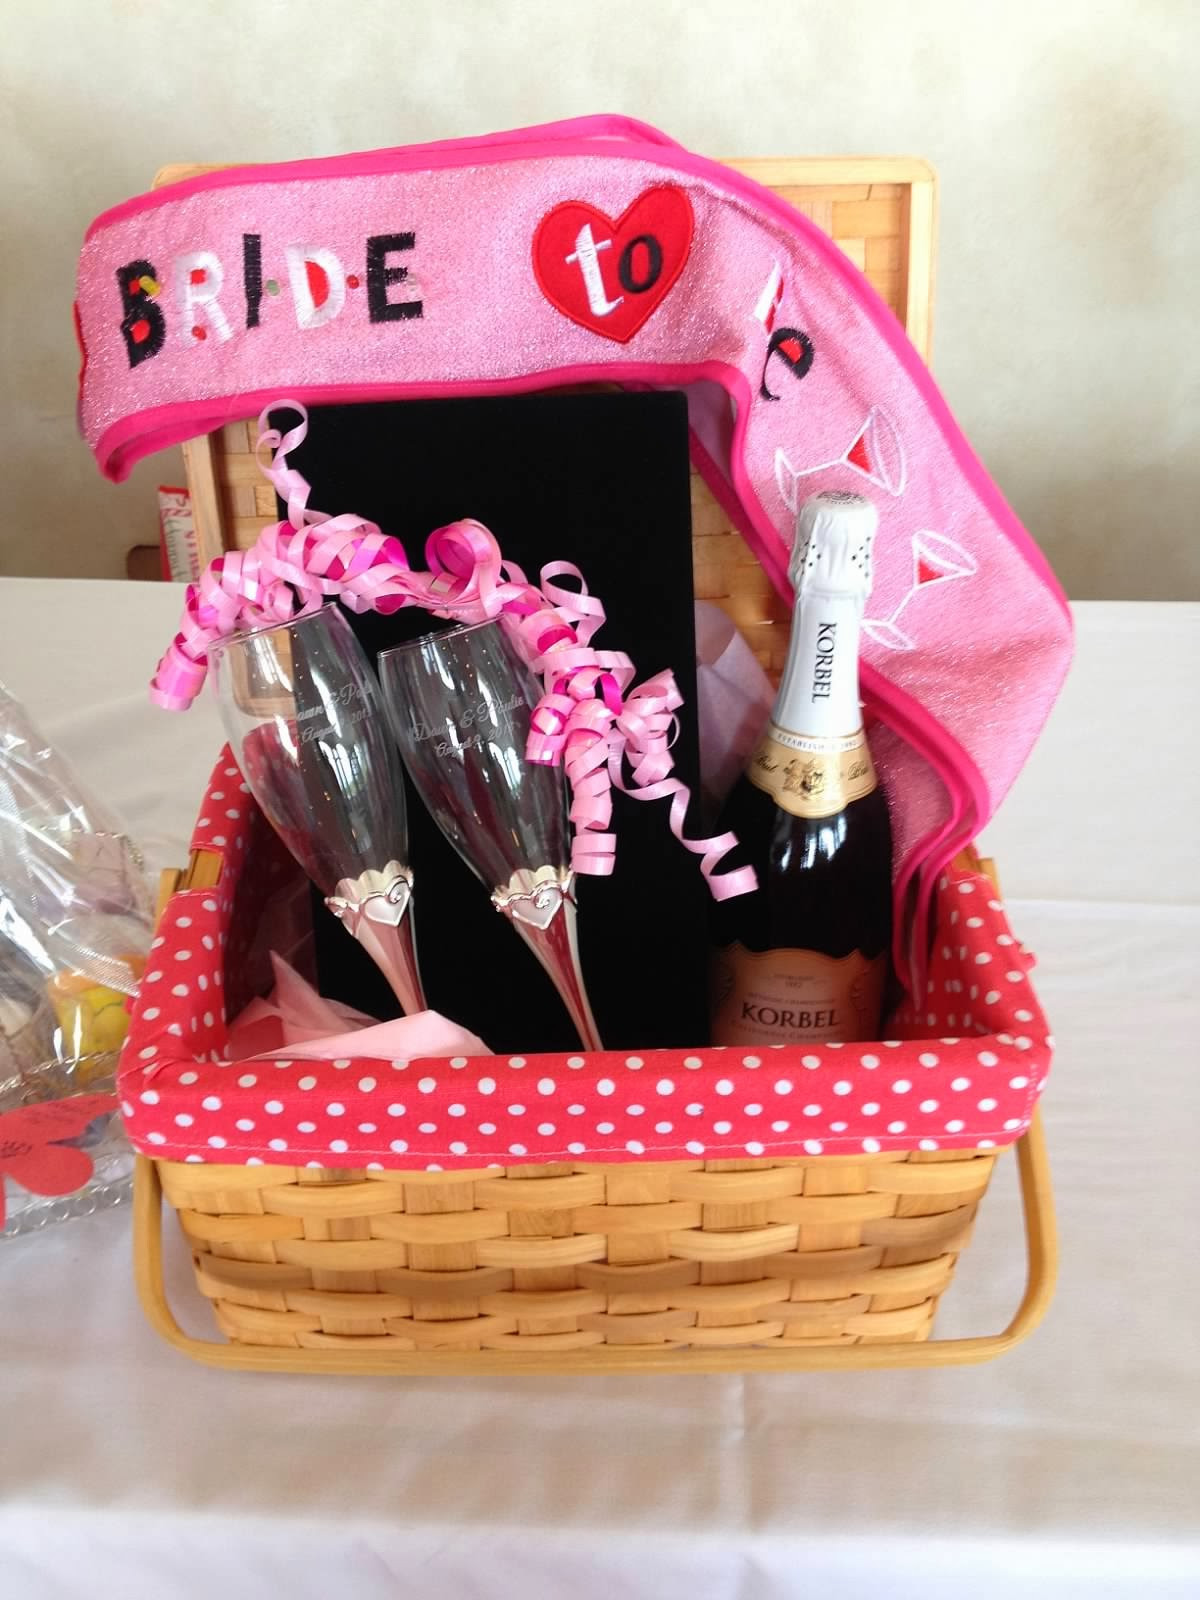 Gift Basket Ideas For Bridal Showers
 2 Girls 1 Year 730 Moments to Wedding Wednesdays